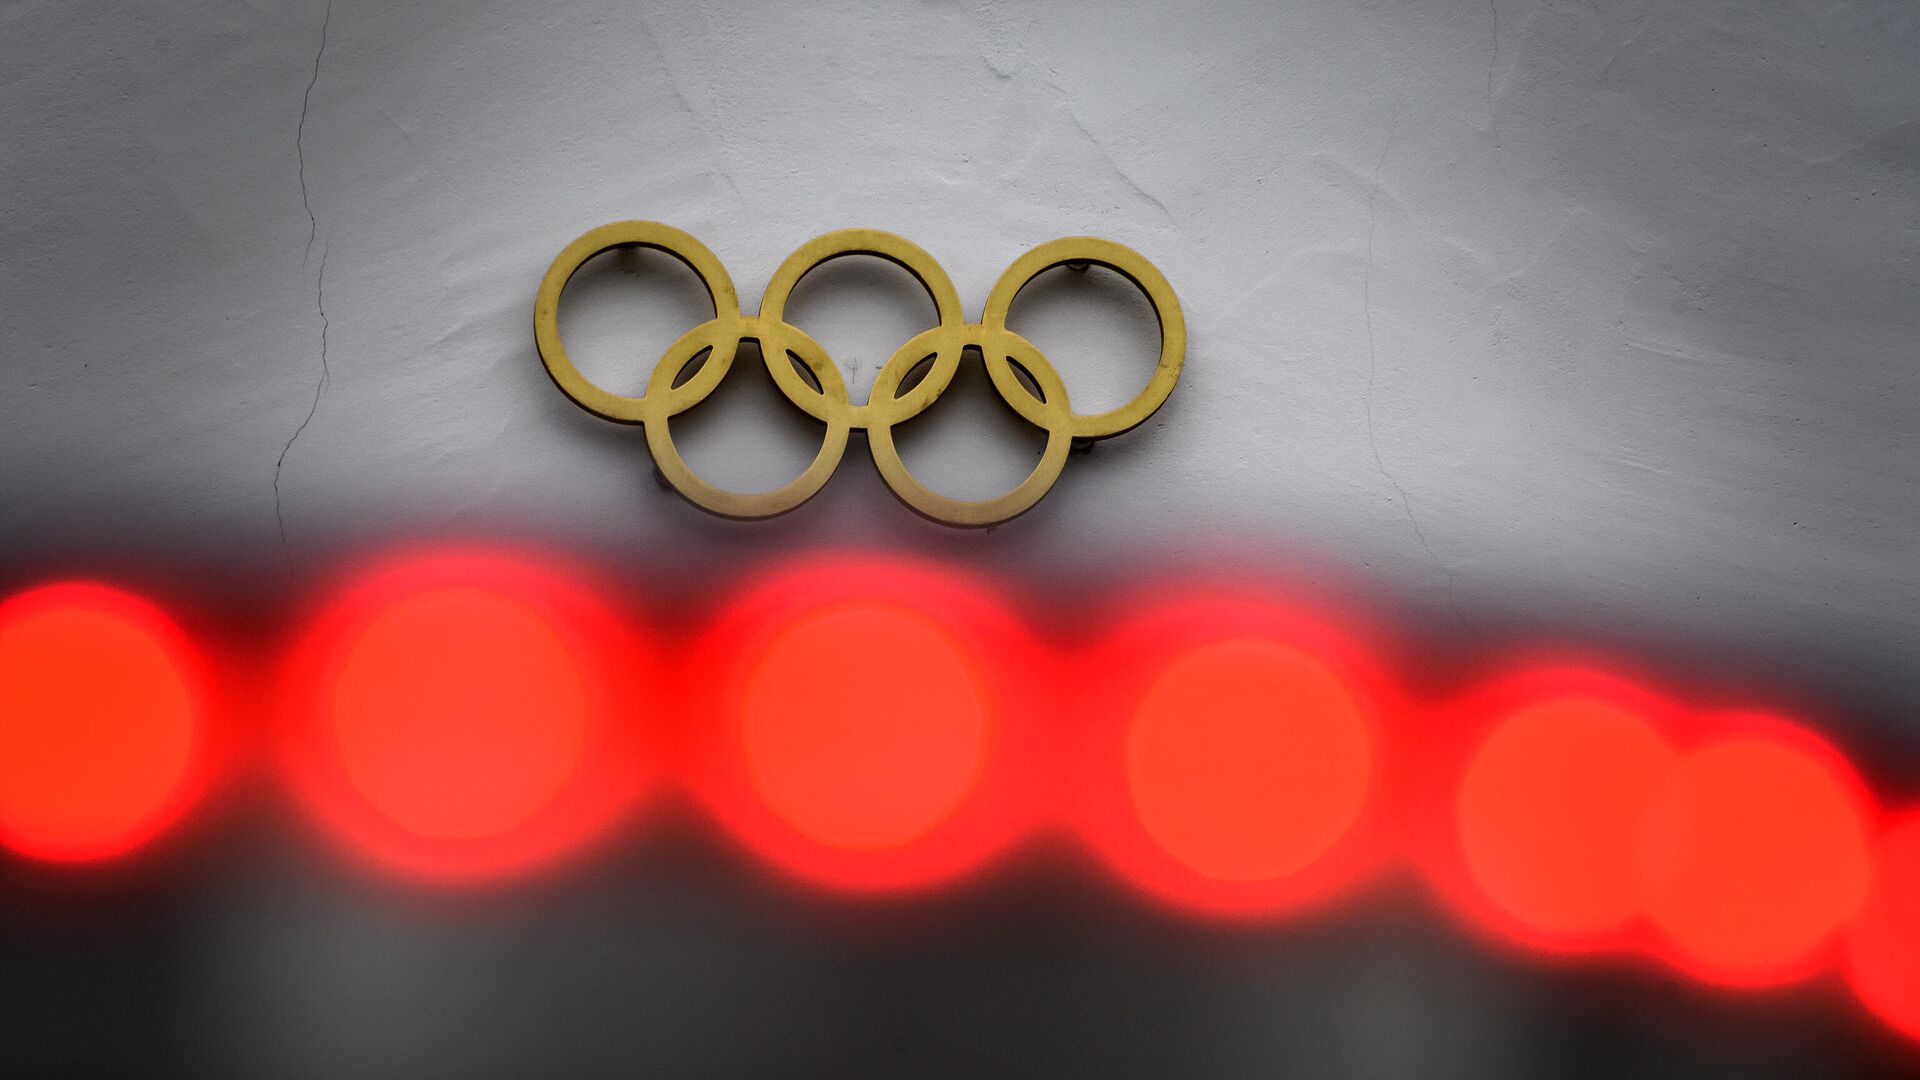 The Olympic Rings are seen at the headquarters of the International Olympic Committee (IOC) in Lausanne on February 3, 2021. (Photo by Fabrice COFFRINI / AFP) - РИА Новости, 1920, 06.02.2021